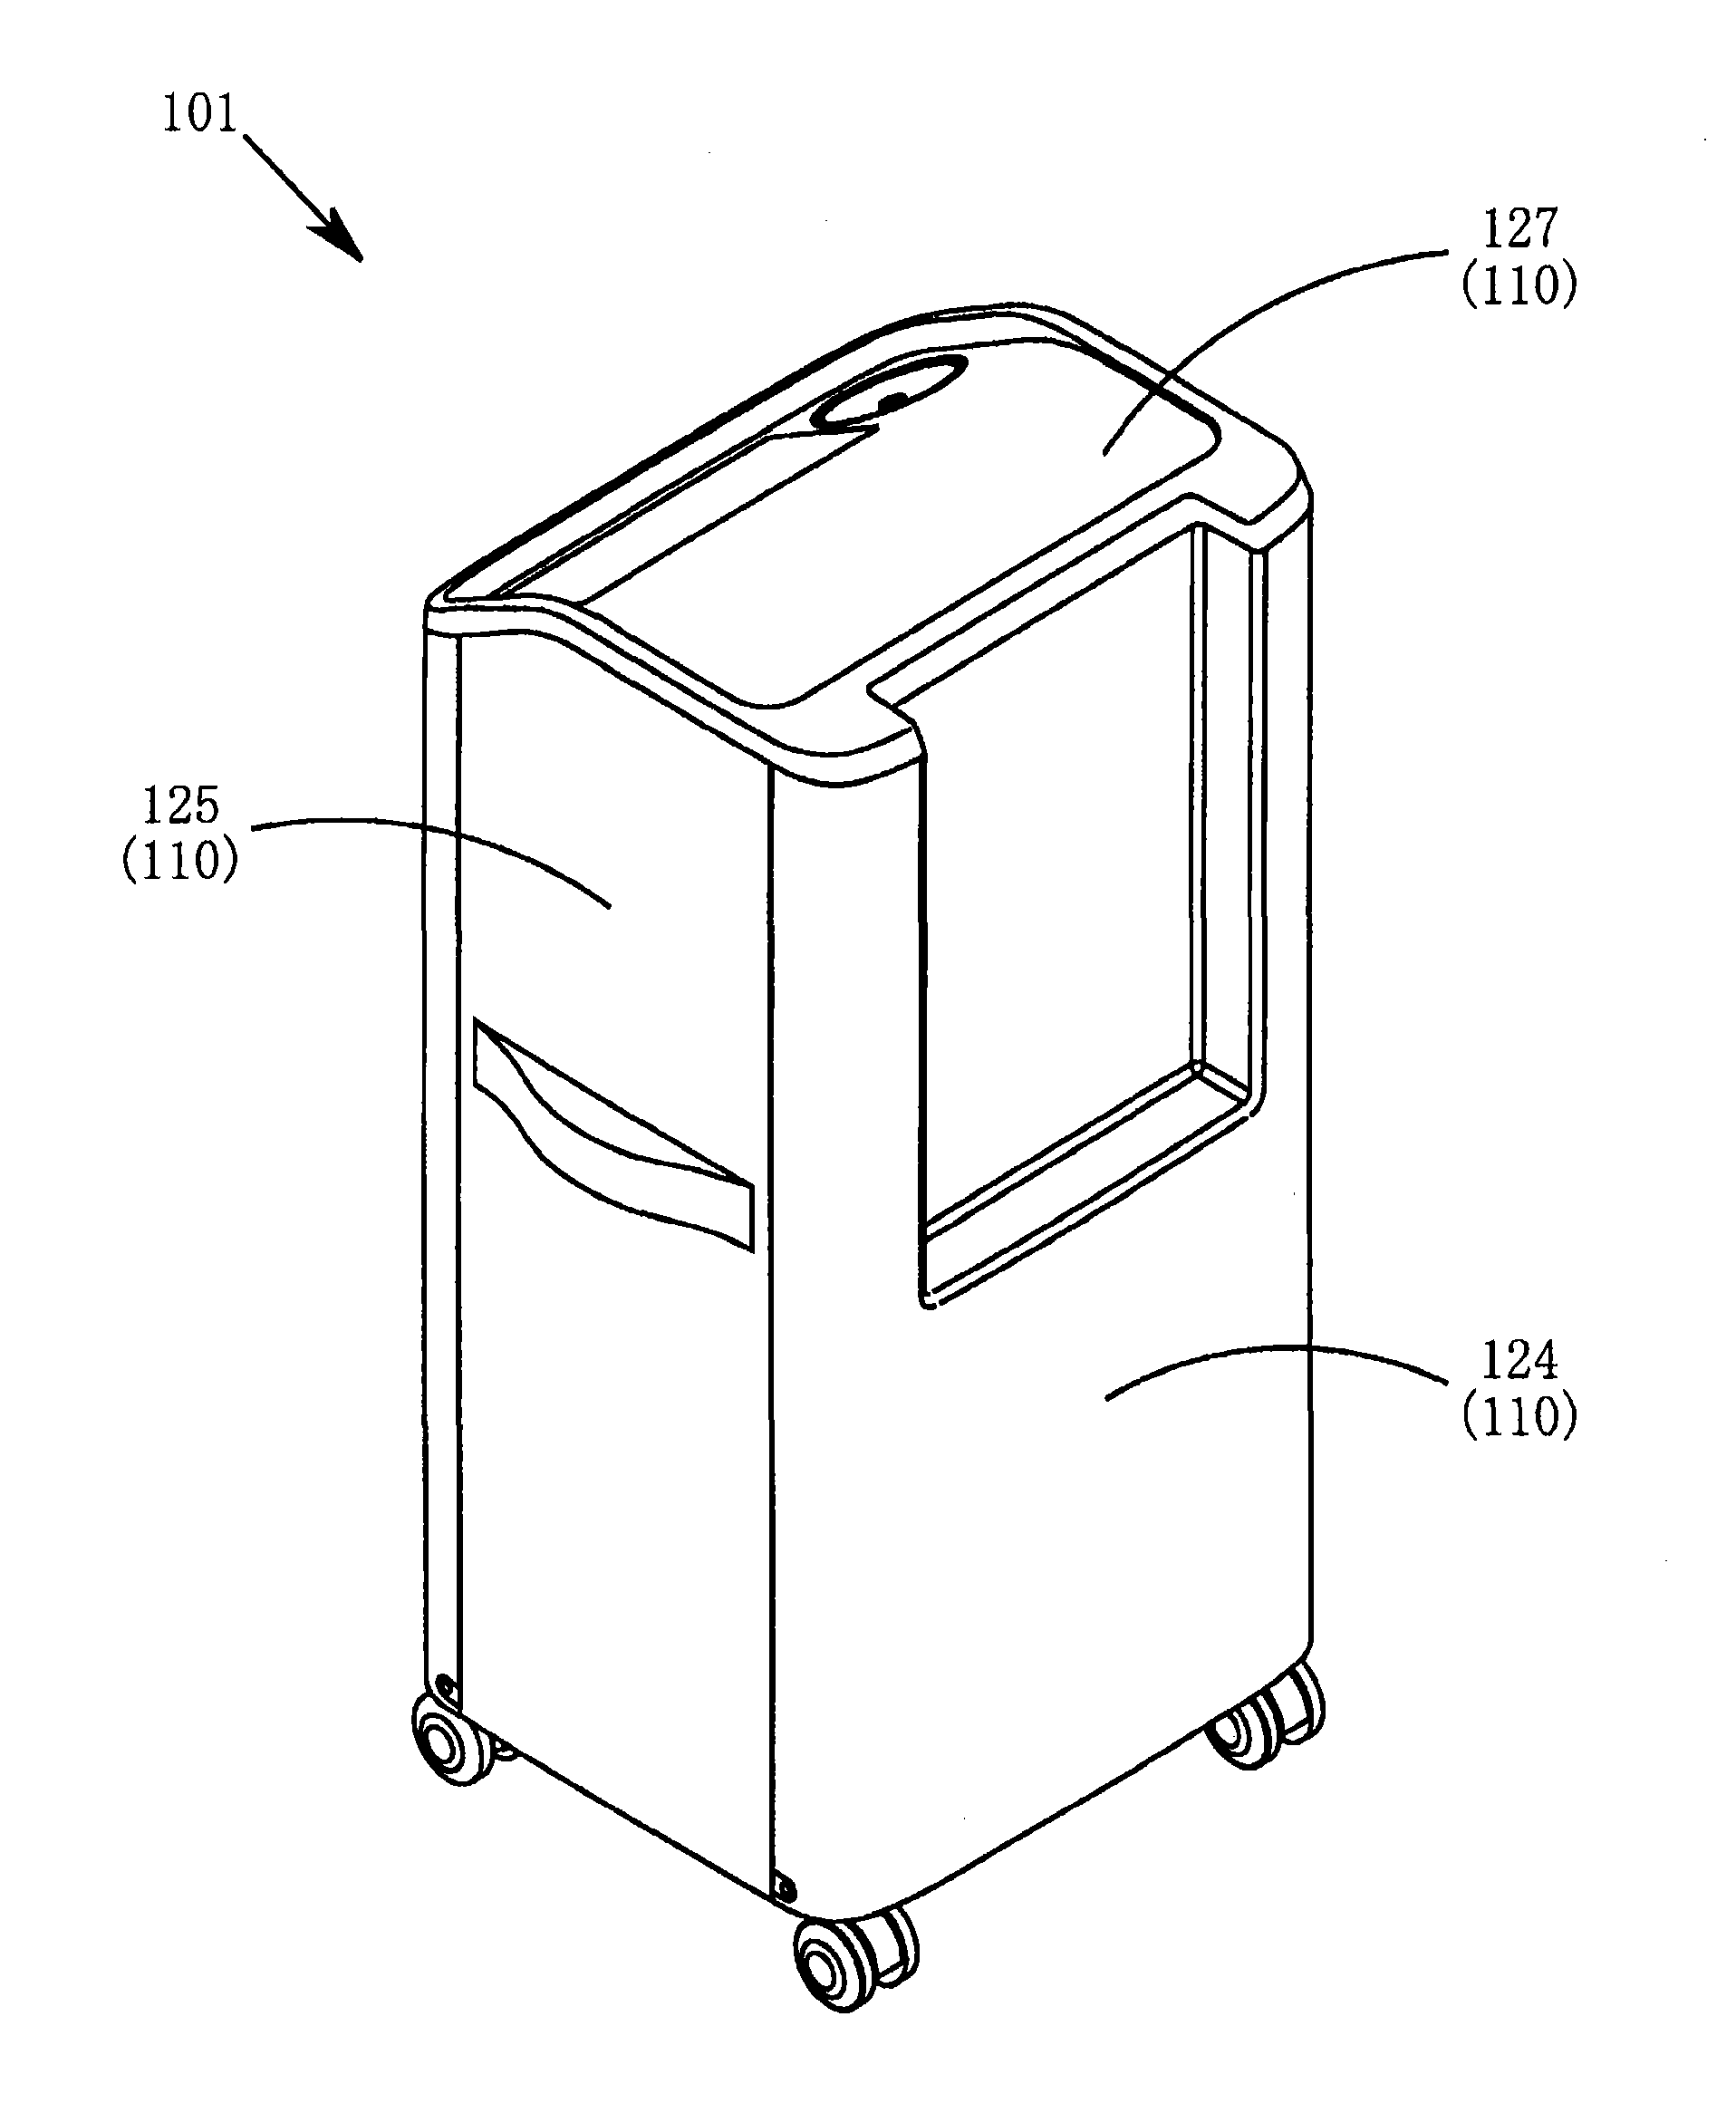 Oxygen concentrating device